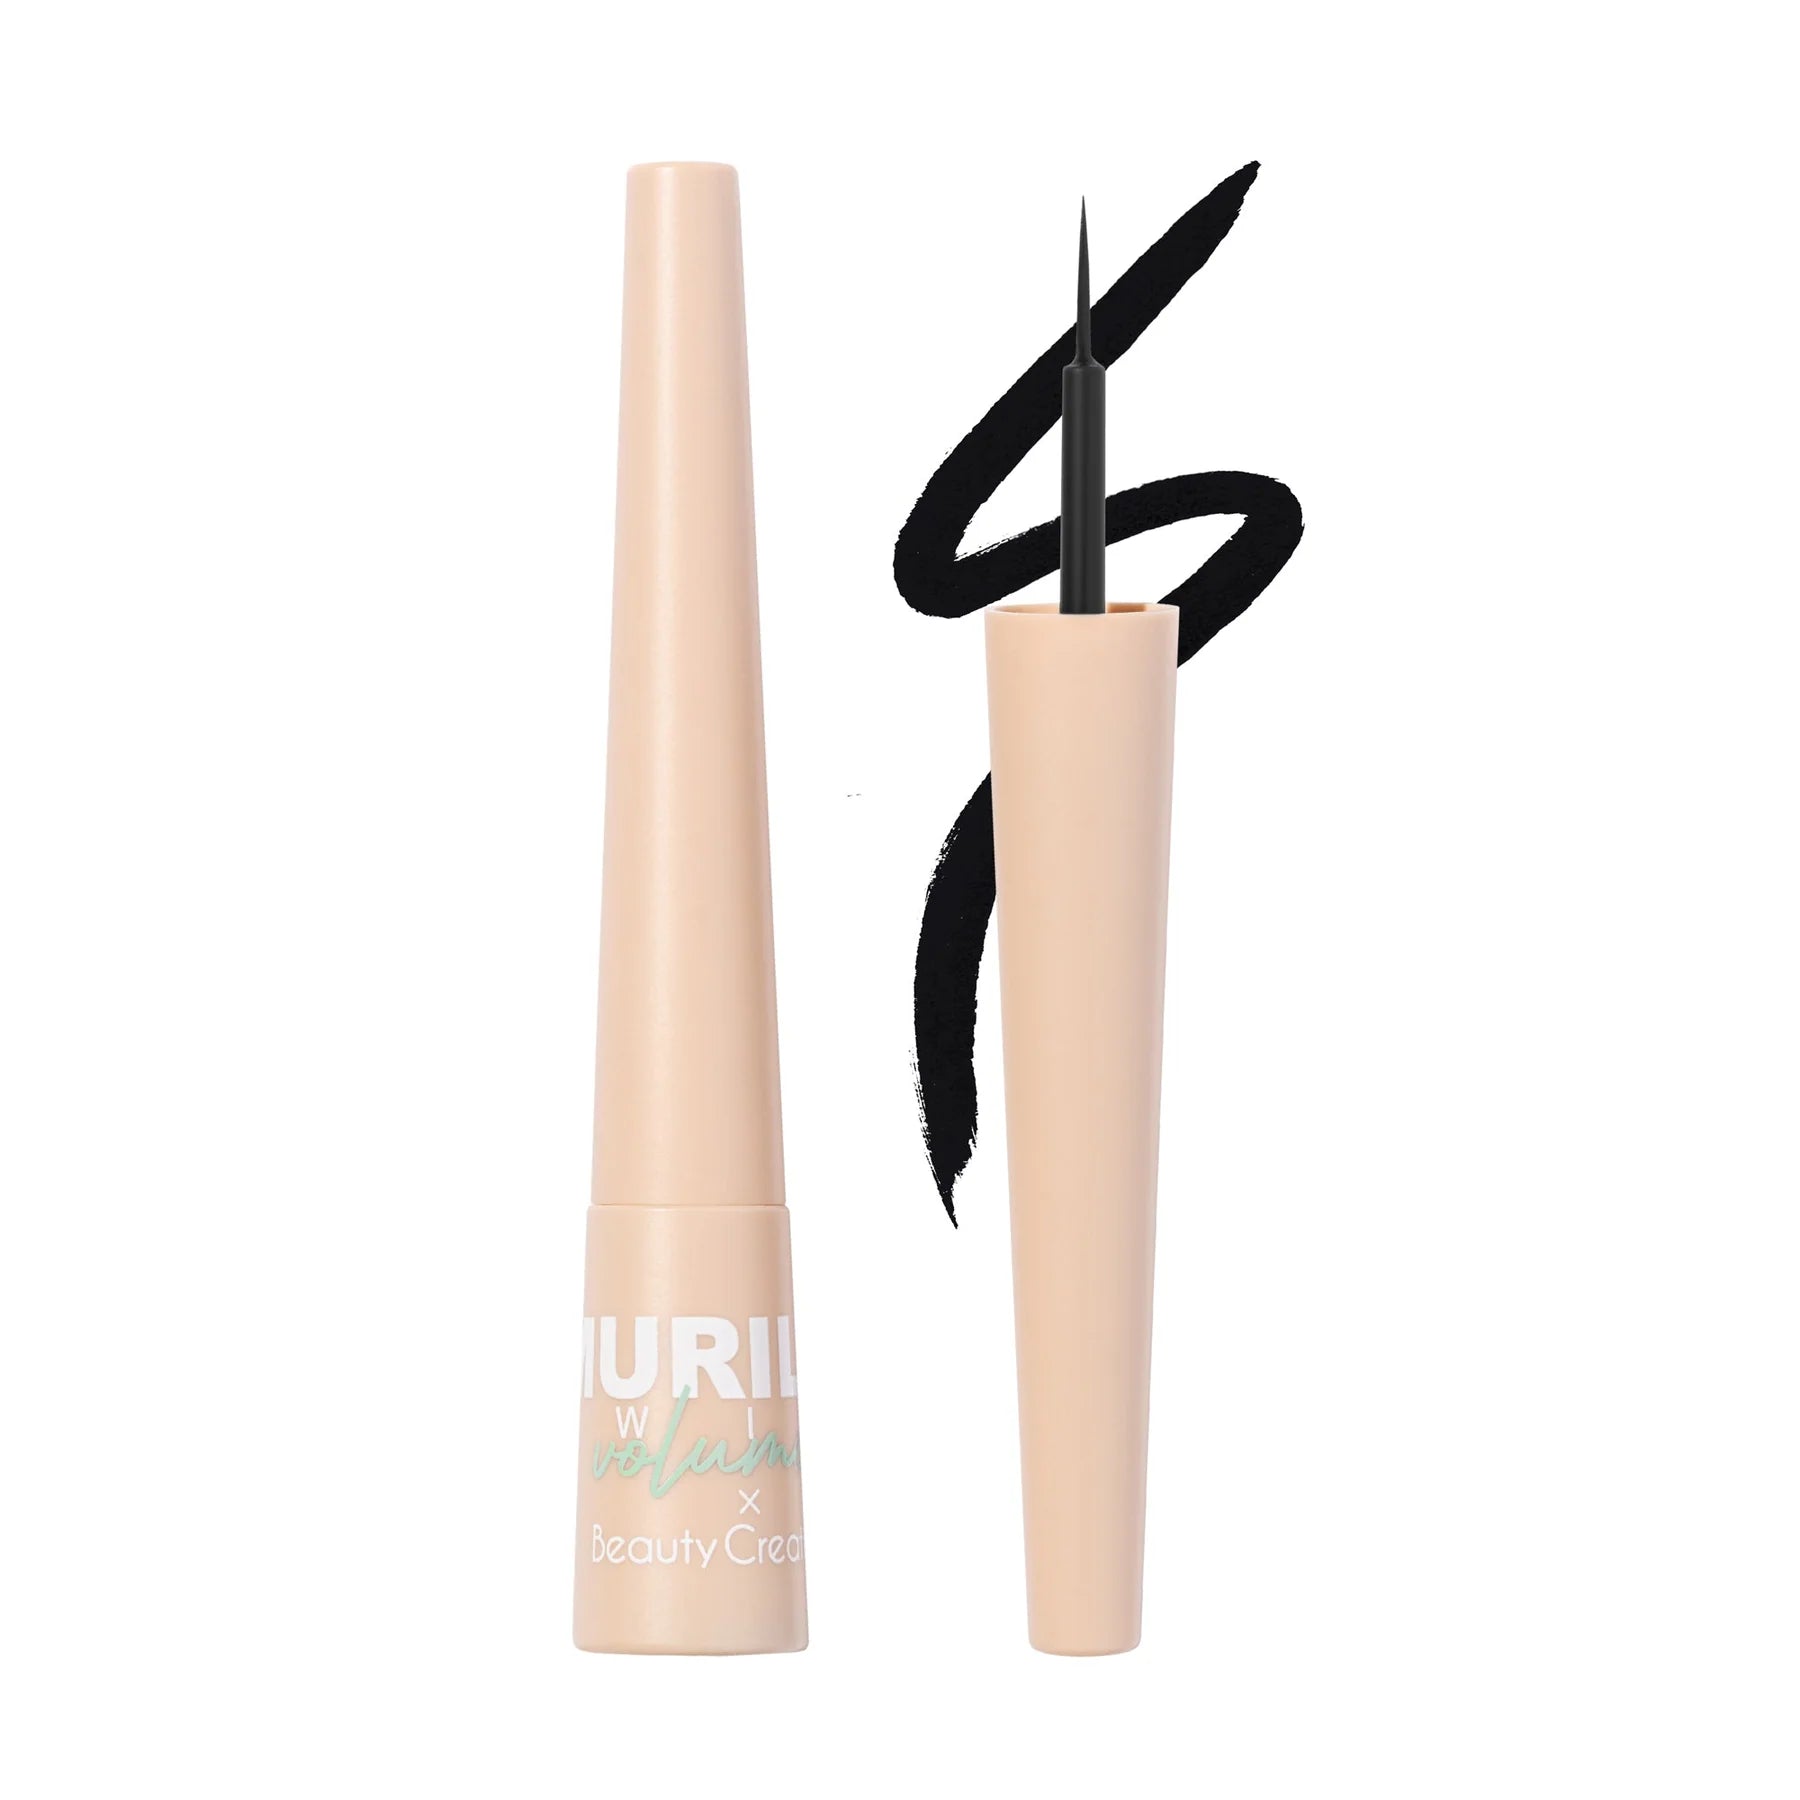 Beauty Creations - Murillo Twins Vol. 2 Twintution Eyeliners